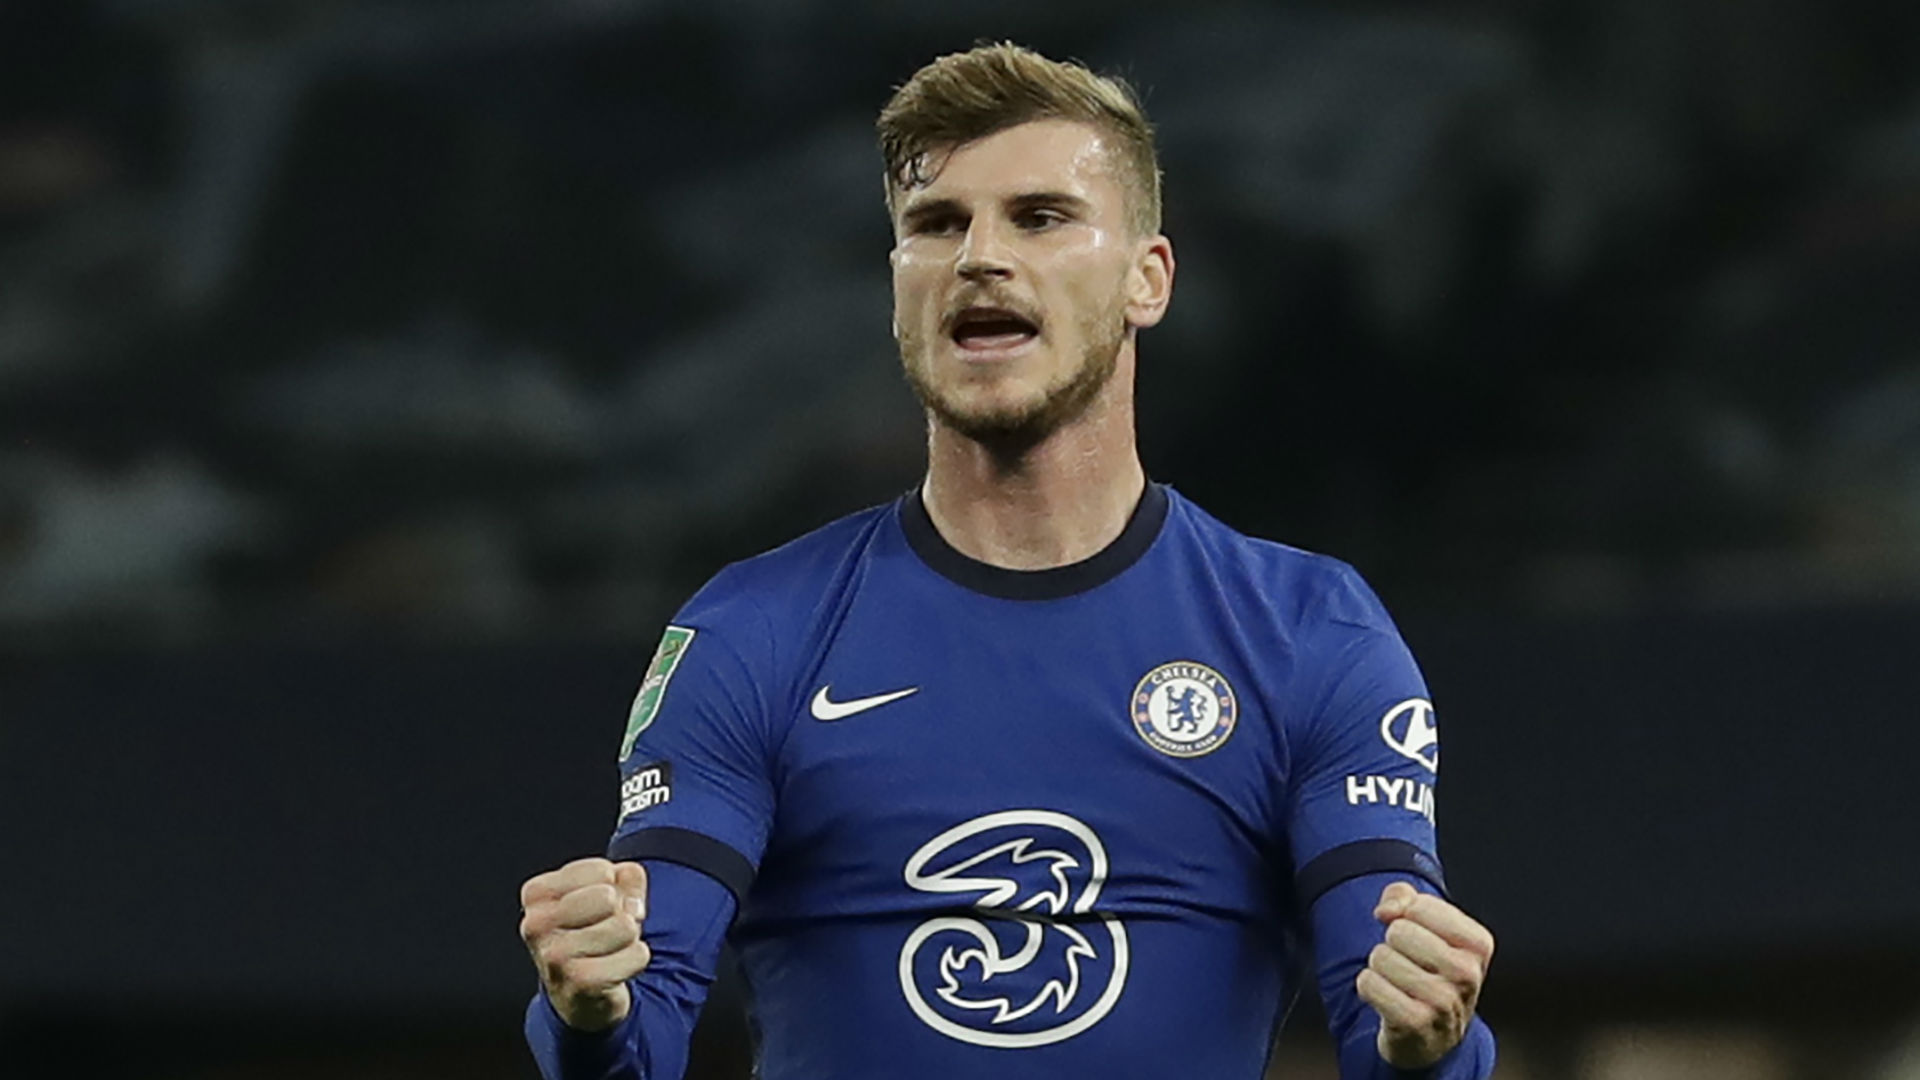 'The goals will come' - Lampard has 'no doubt' Werner will come good amid Chelsea struggles